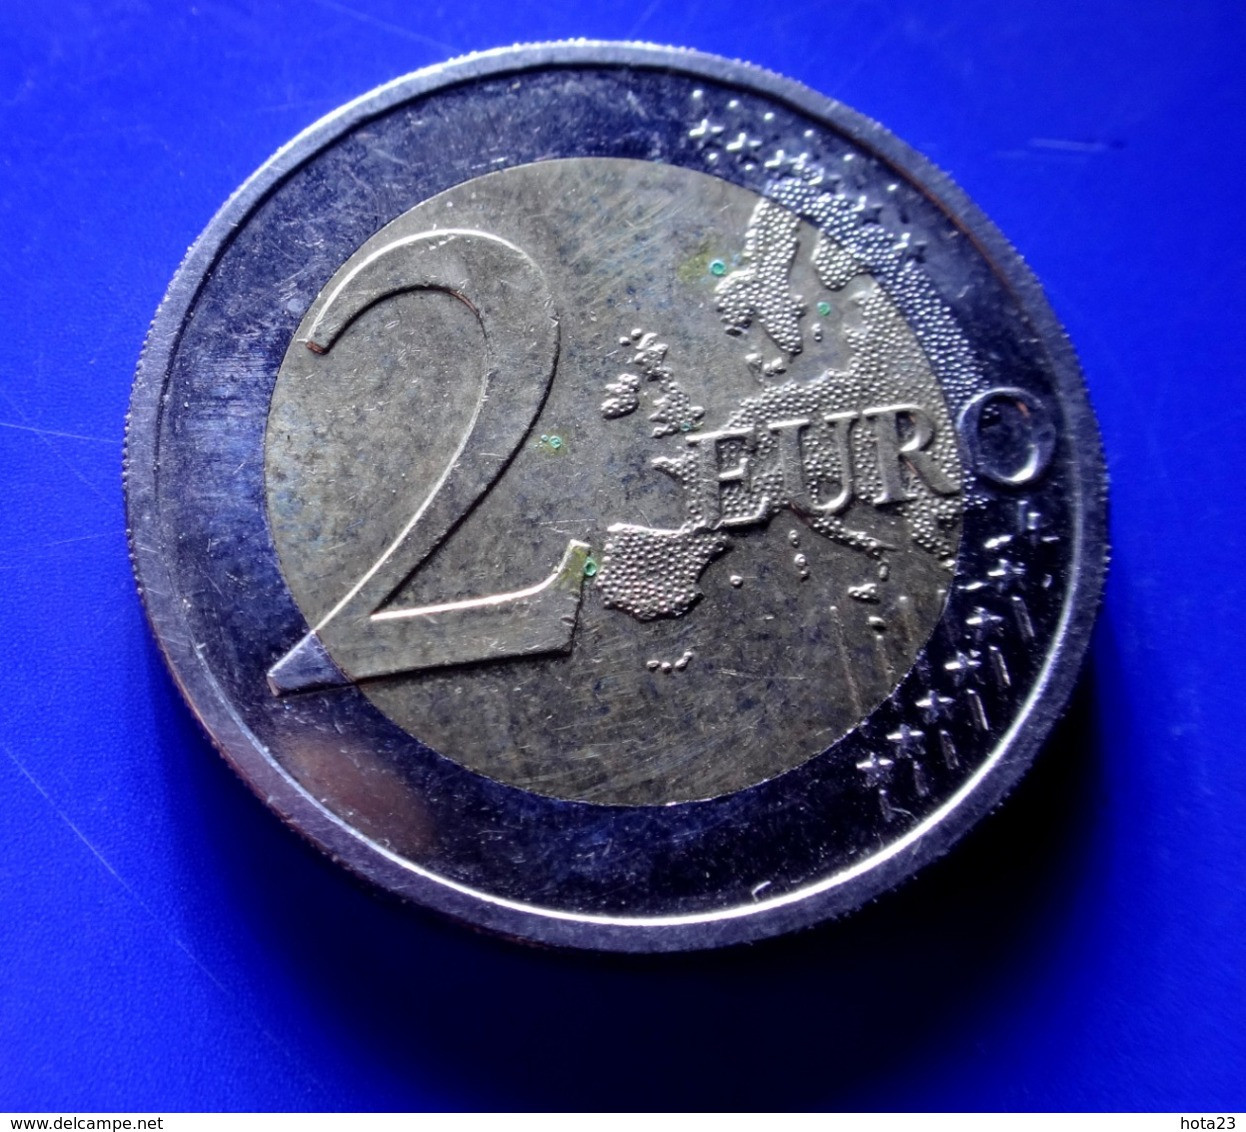 (!)  Latvia 2015 Year 2 Euro Commemorative Coin "30 Years Of EU Flag"  !!!  CICULATED  !!!! - Lettland